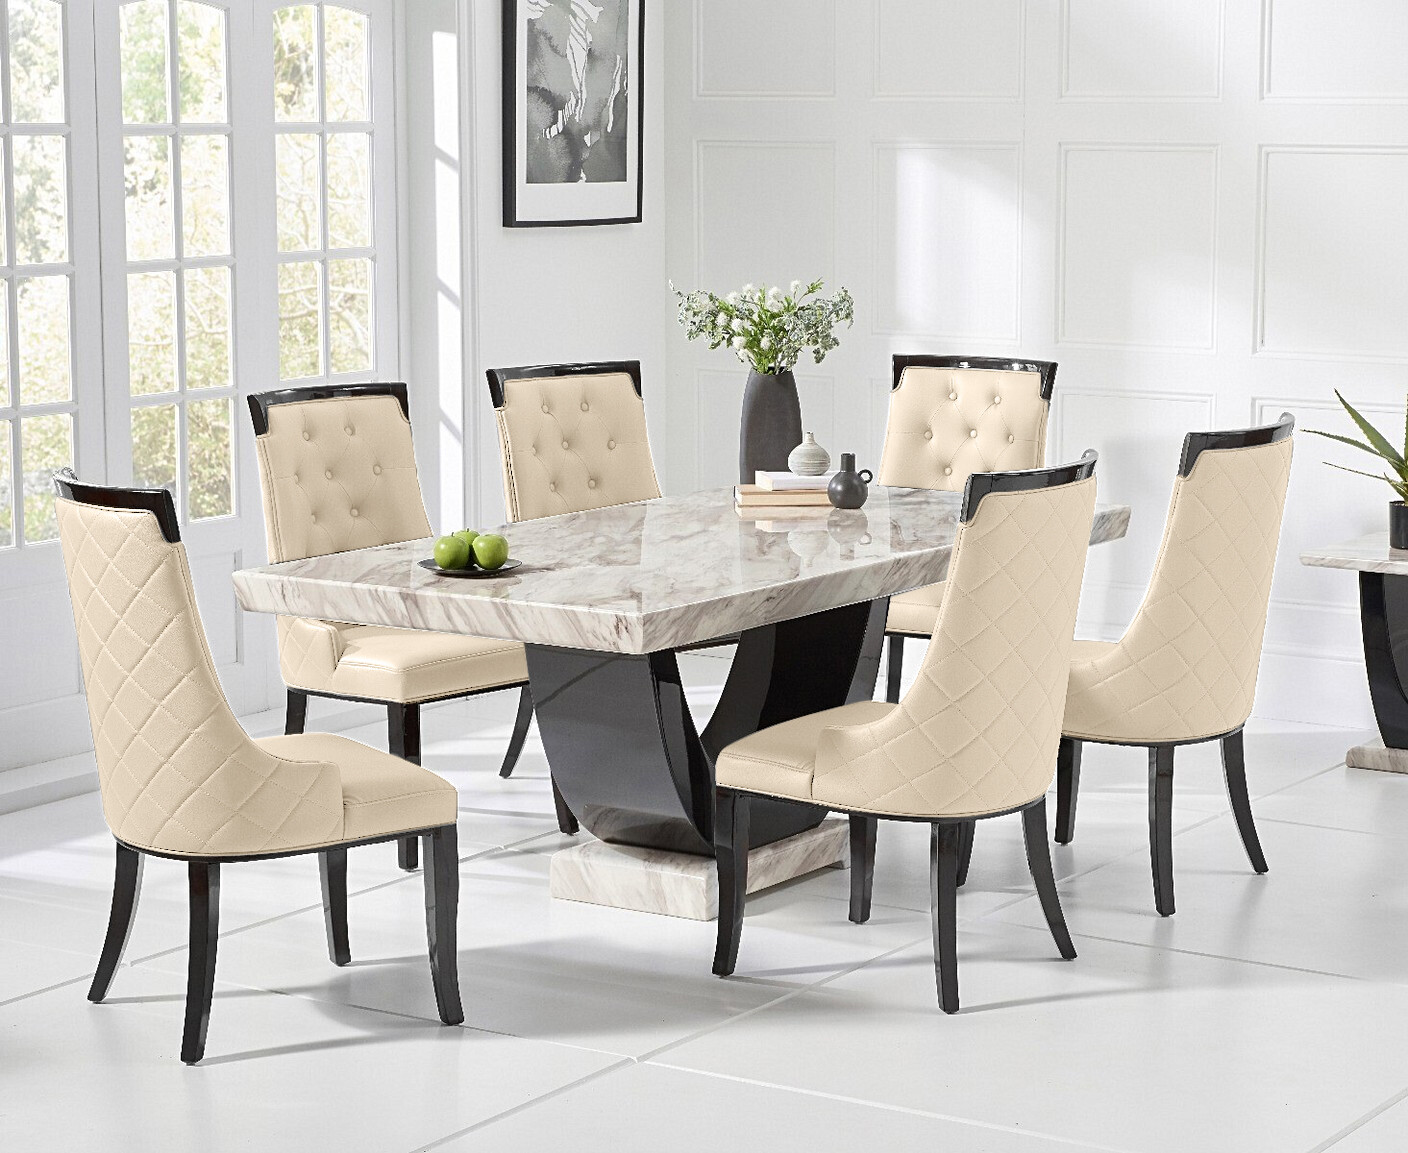 Photo 2 of Raphael 170cm cream and black pedestal marble dining table with 4 grey francesca chairs